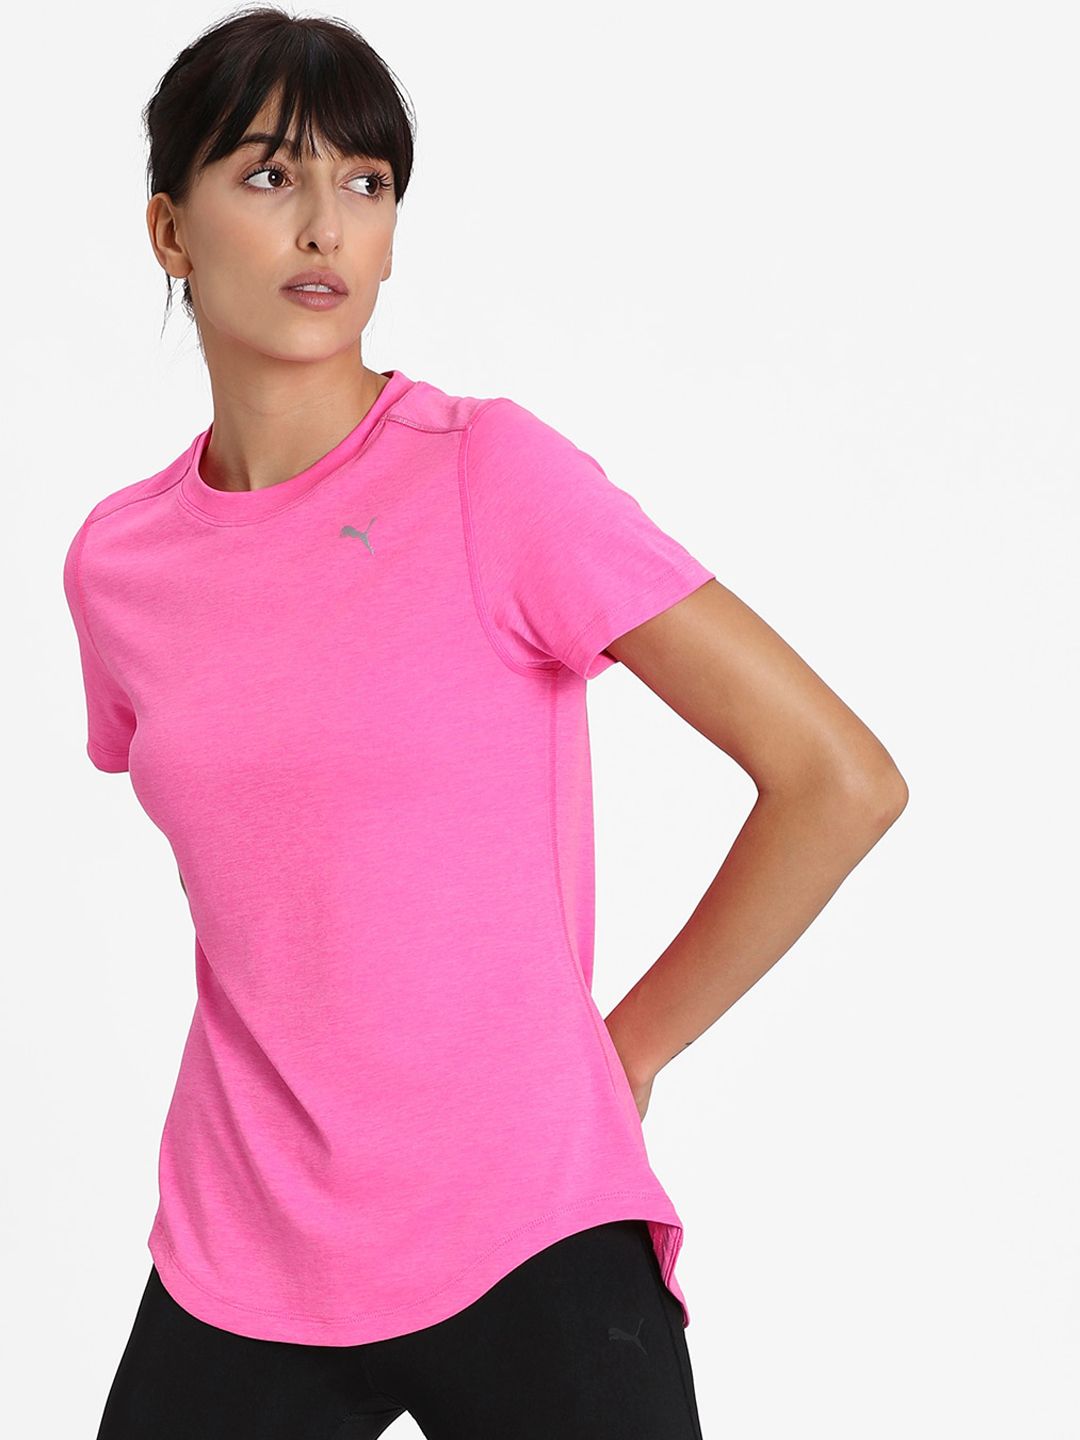 Puma Women Pink IGNITE dryCELL Heather T-Shirt Price in India